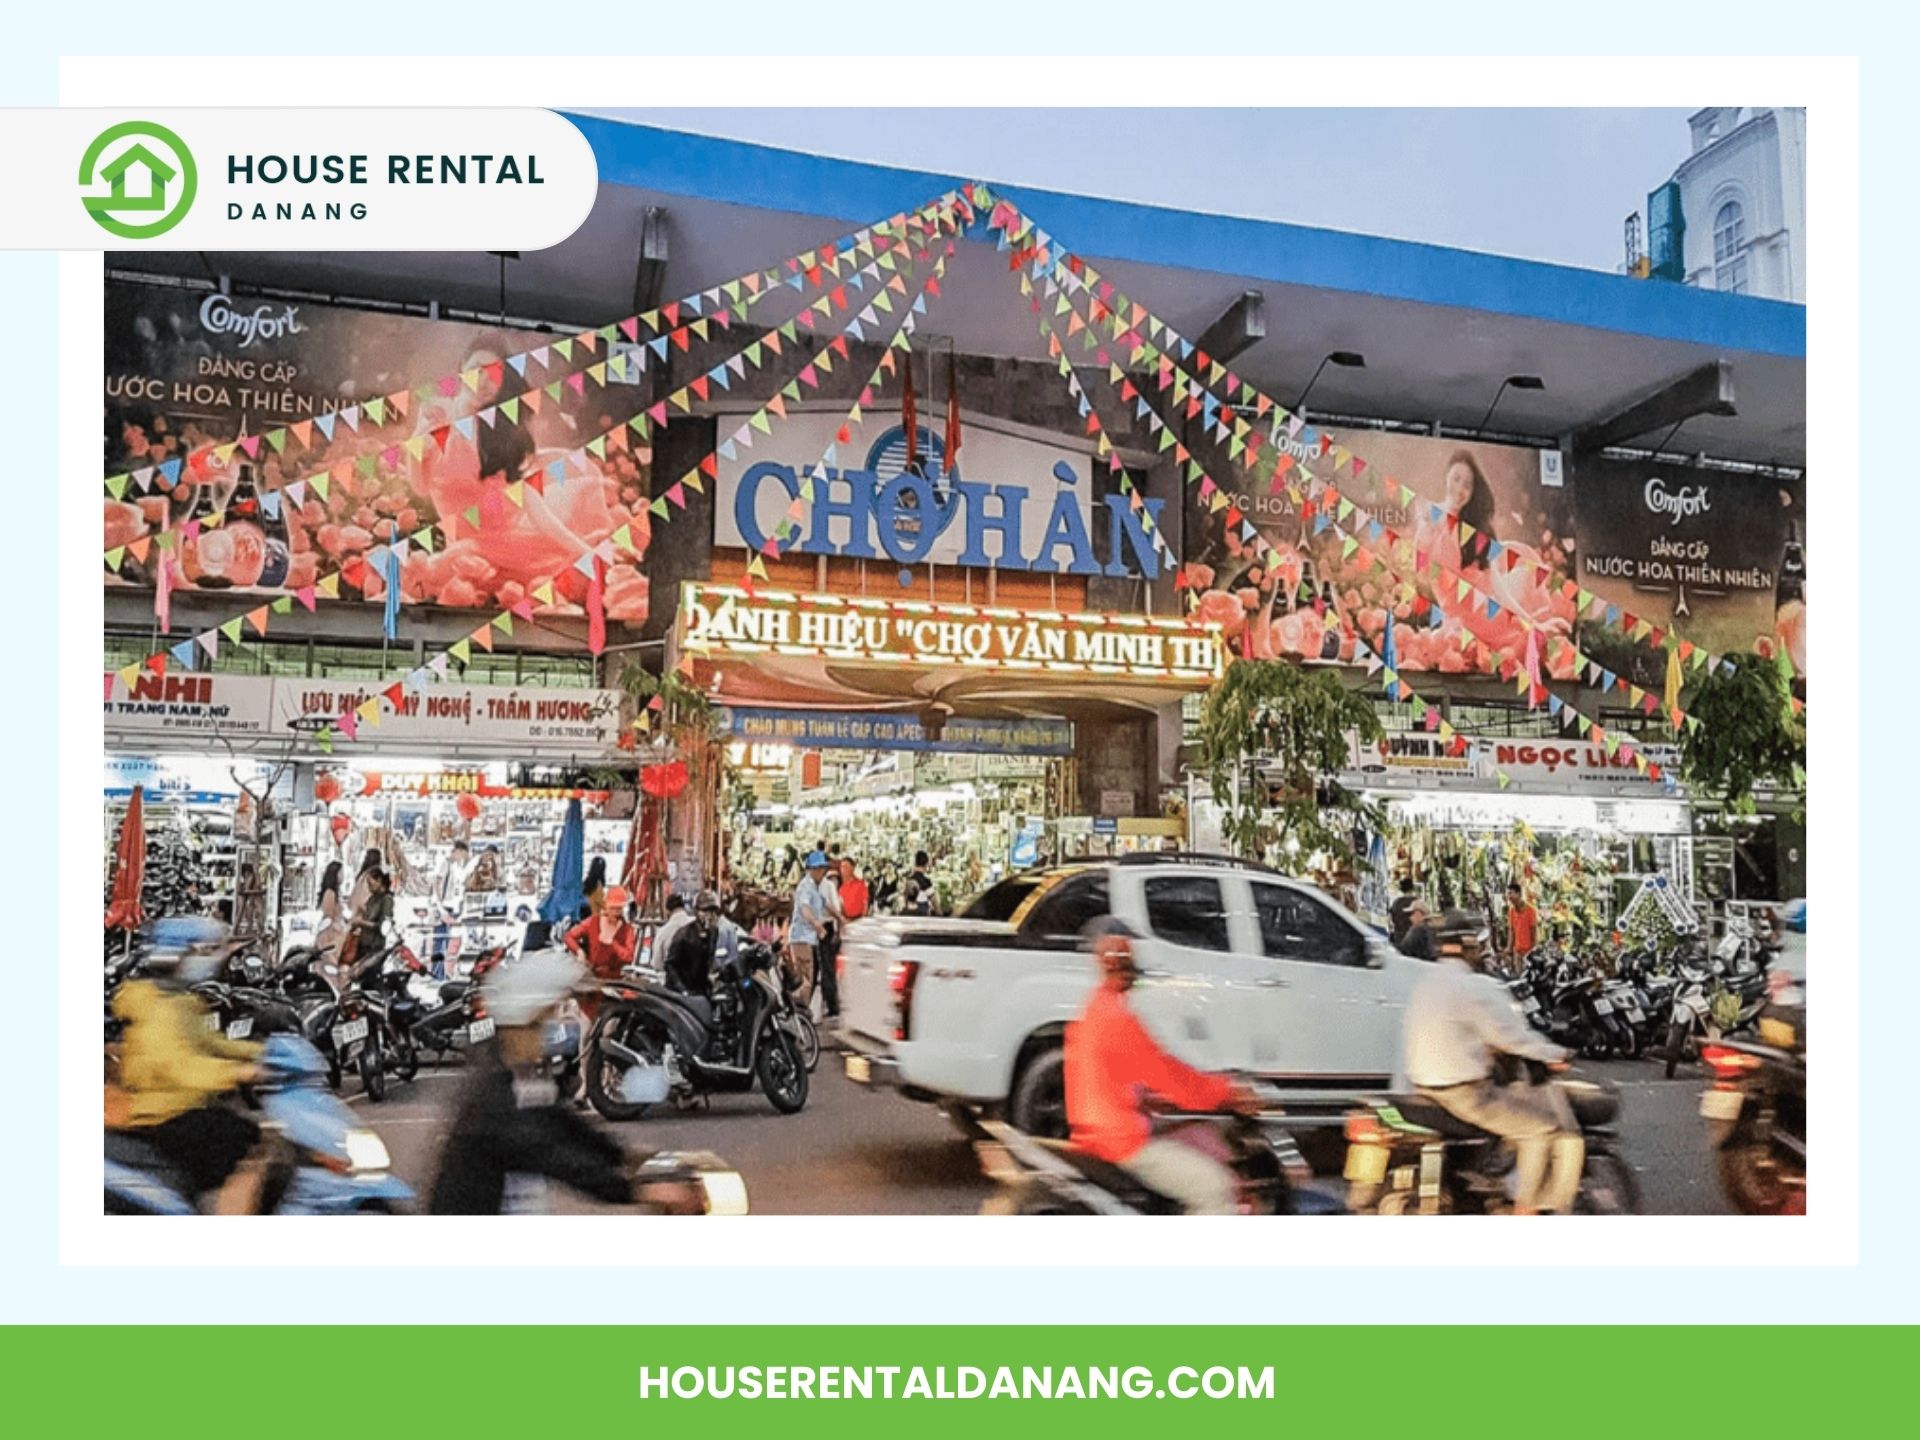 A bustling market scene at "Chợ Hàn," one of the best places for shopping in Da Nang, features numerous motorcycles, cars, and pedestrians passing by. The area is adorned with colorful flags and banners. Signs in Vietnamese are visible.